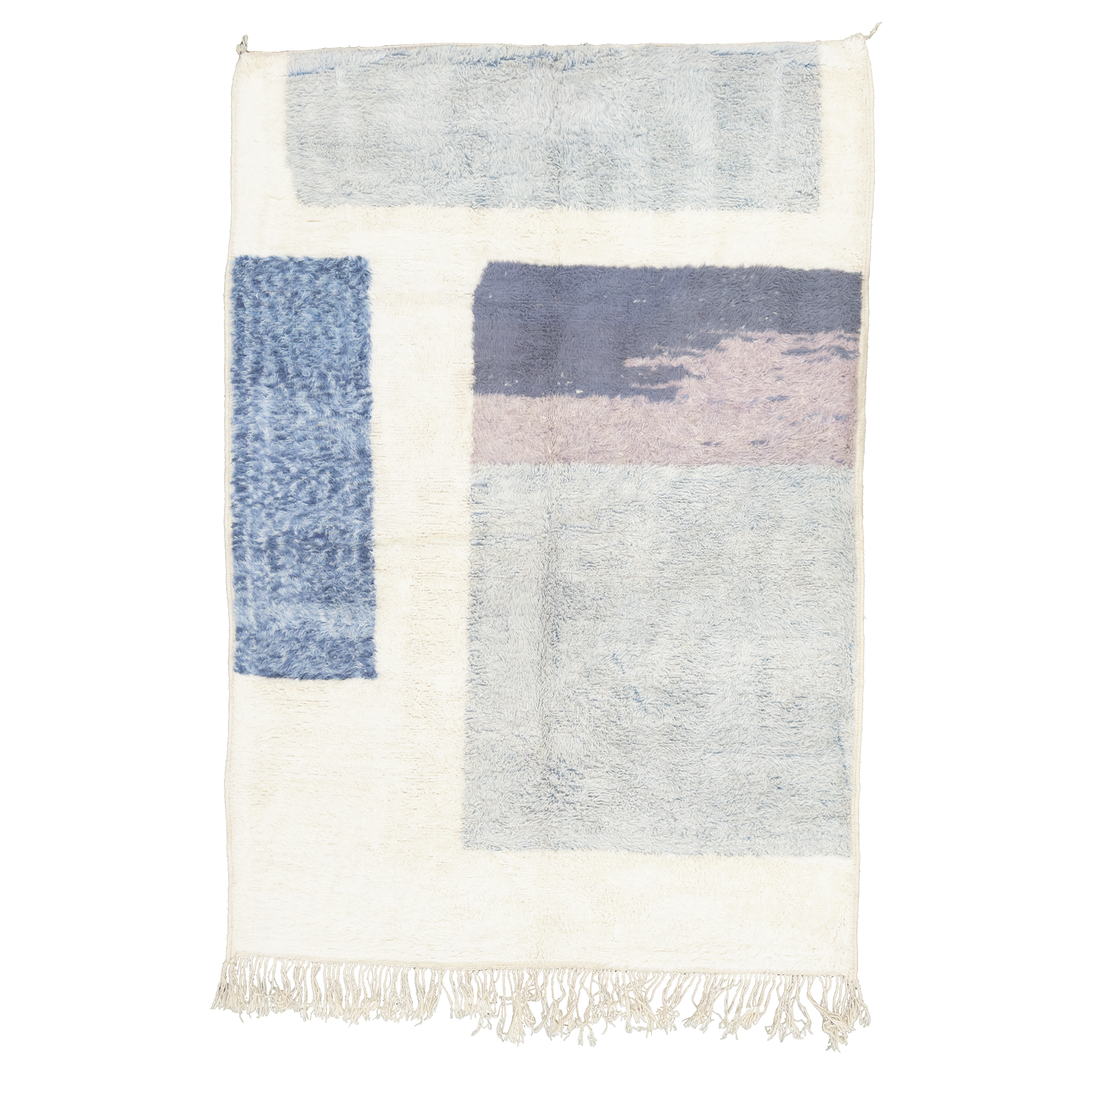 Elevate your space with the Azul 3 Modern Moroccan Area Rug. Handcrafted with soft and durable wool, this contemporary rug features an eye-catching geometric design in cream, azul, light blue, and light purple. Perfect for modern and eclectic interiors. Available in a generous size of 7&